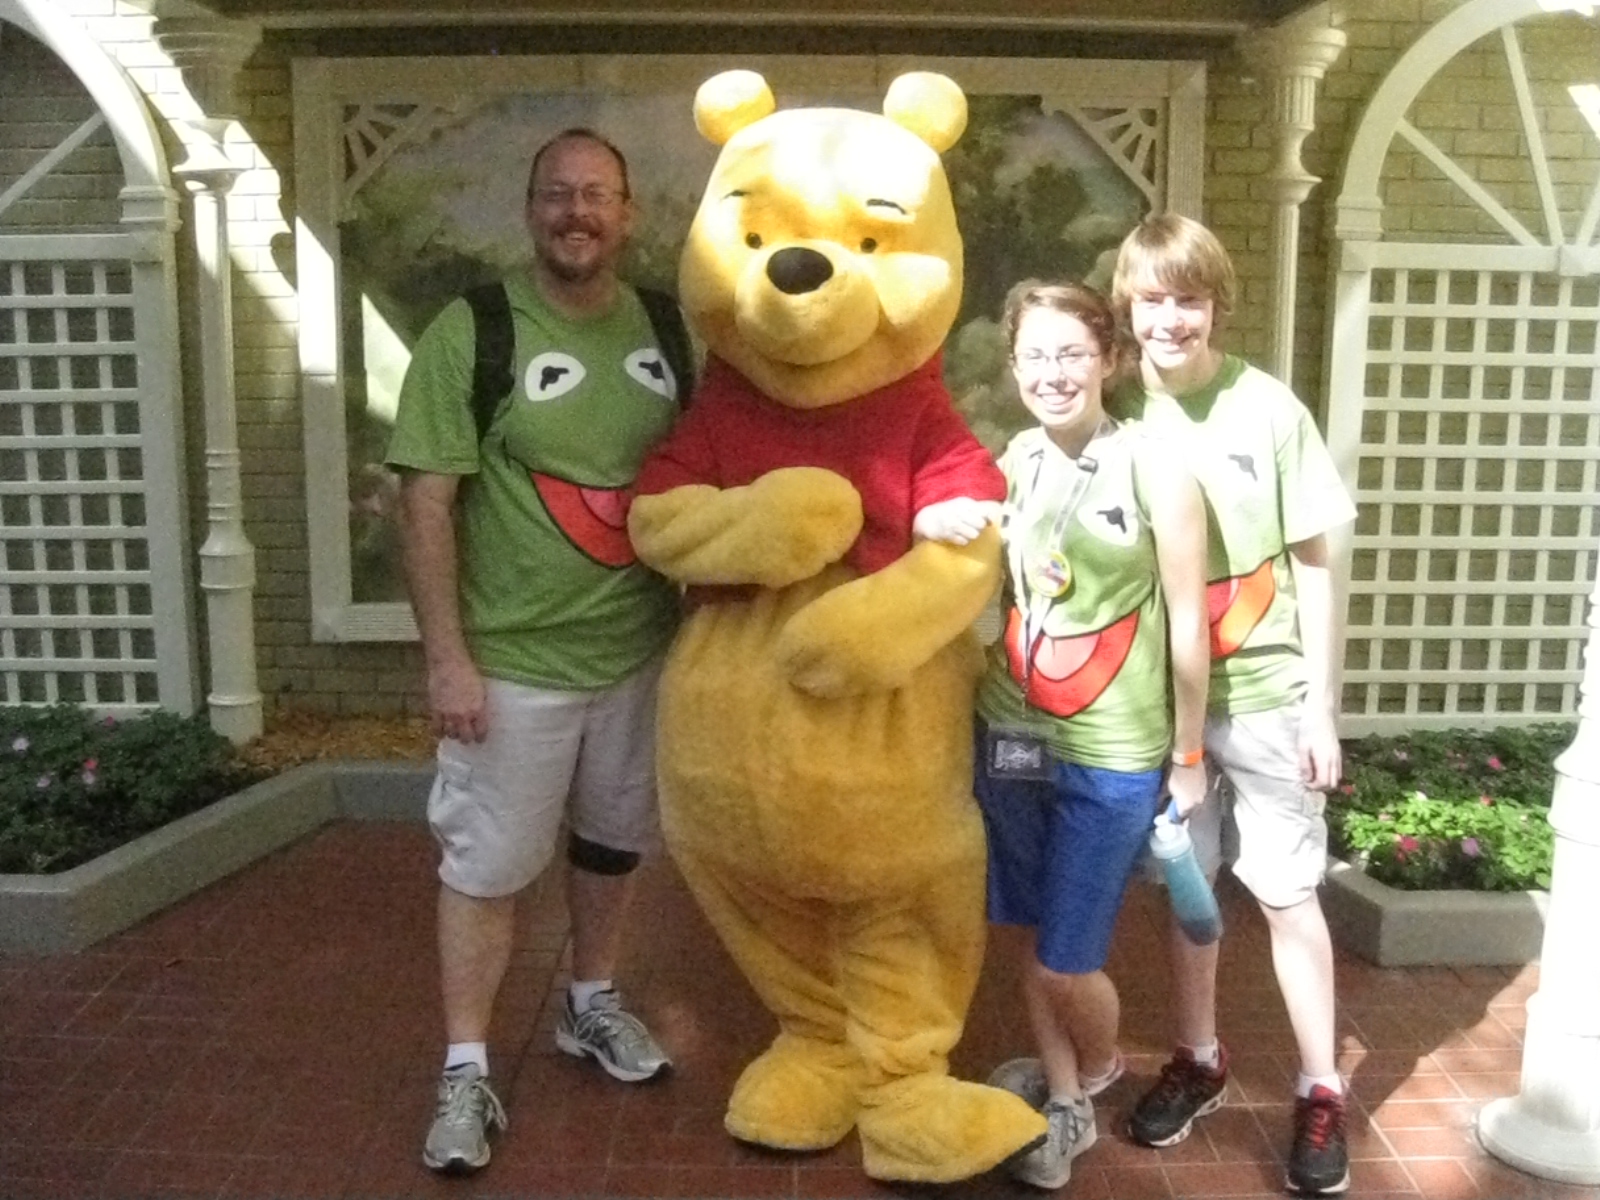 Pooh Bear meeting next to City hall in 2012 Leap Day